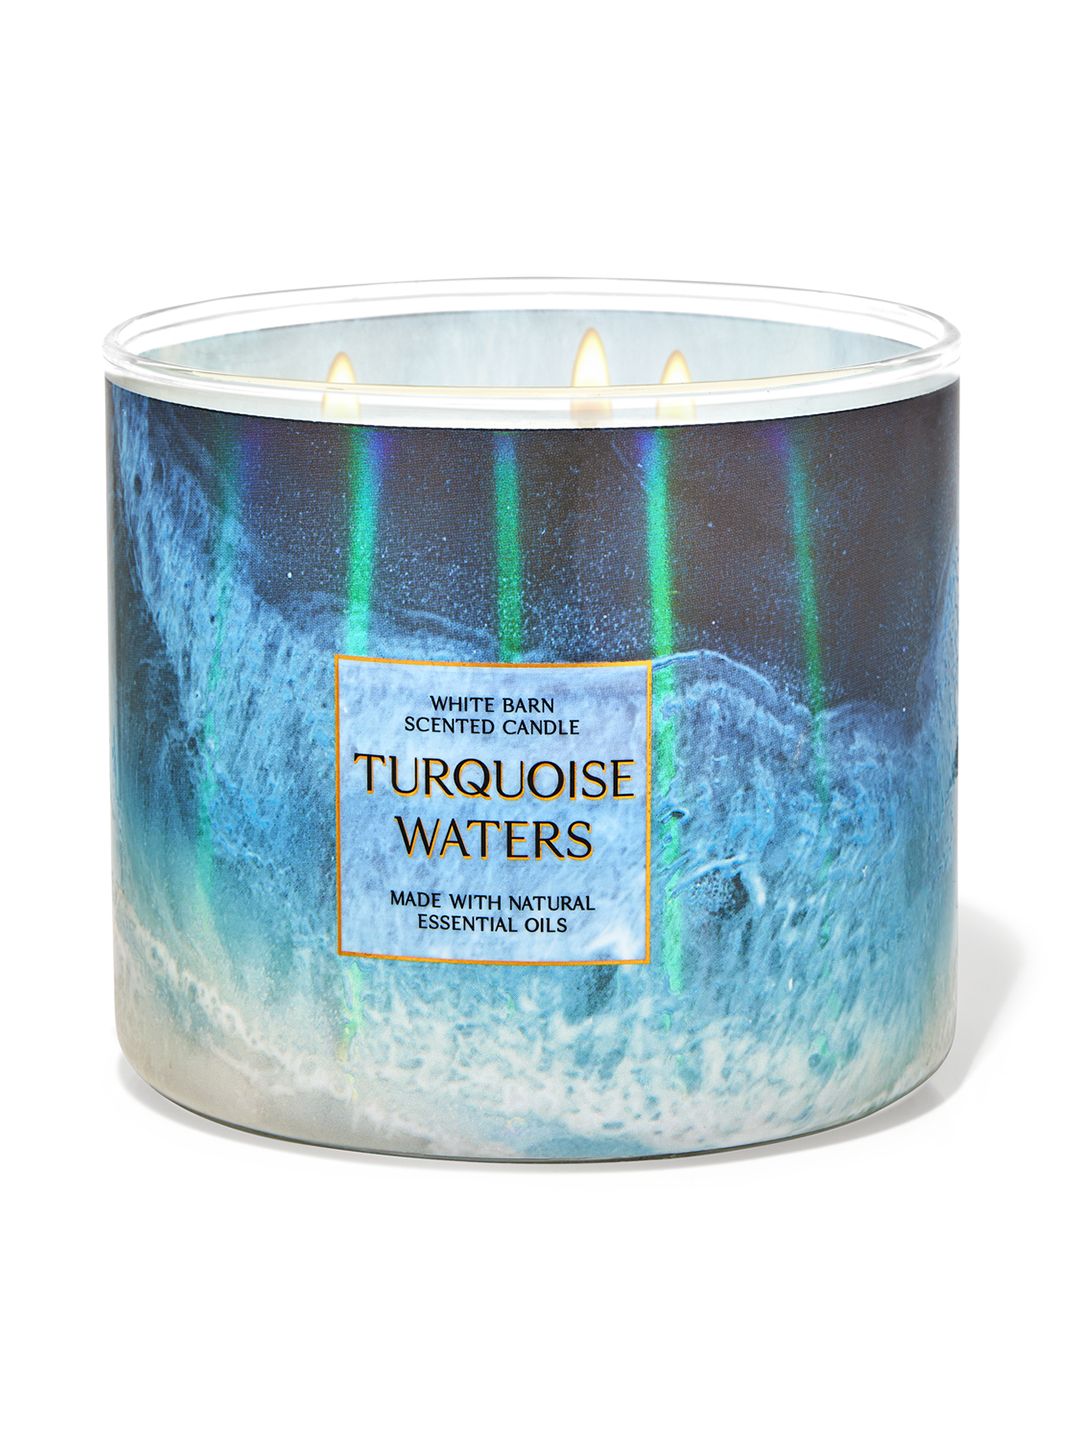 Bath & Body Works Turquoise Waters 3-Wick Candle - 411 g Price in India